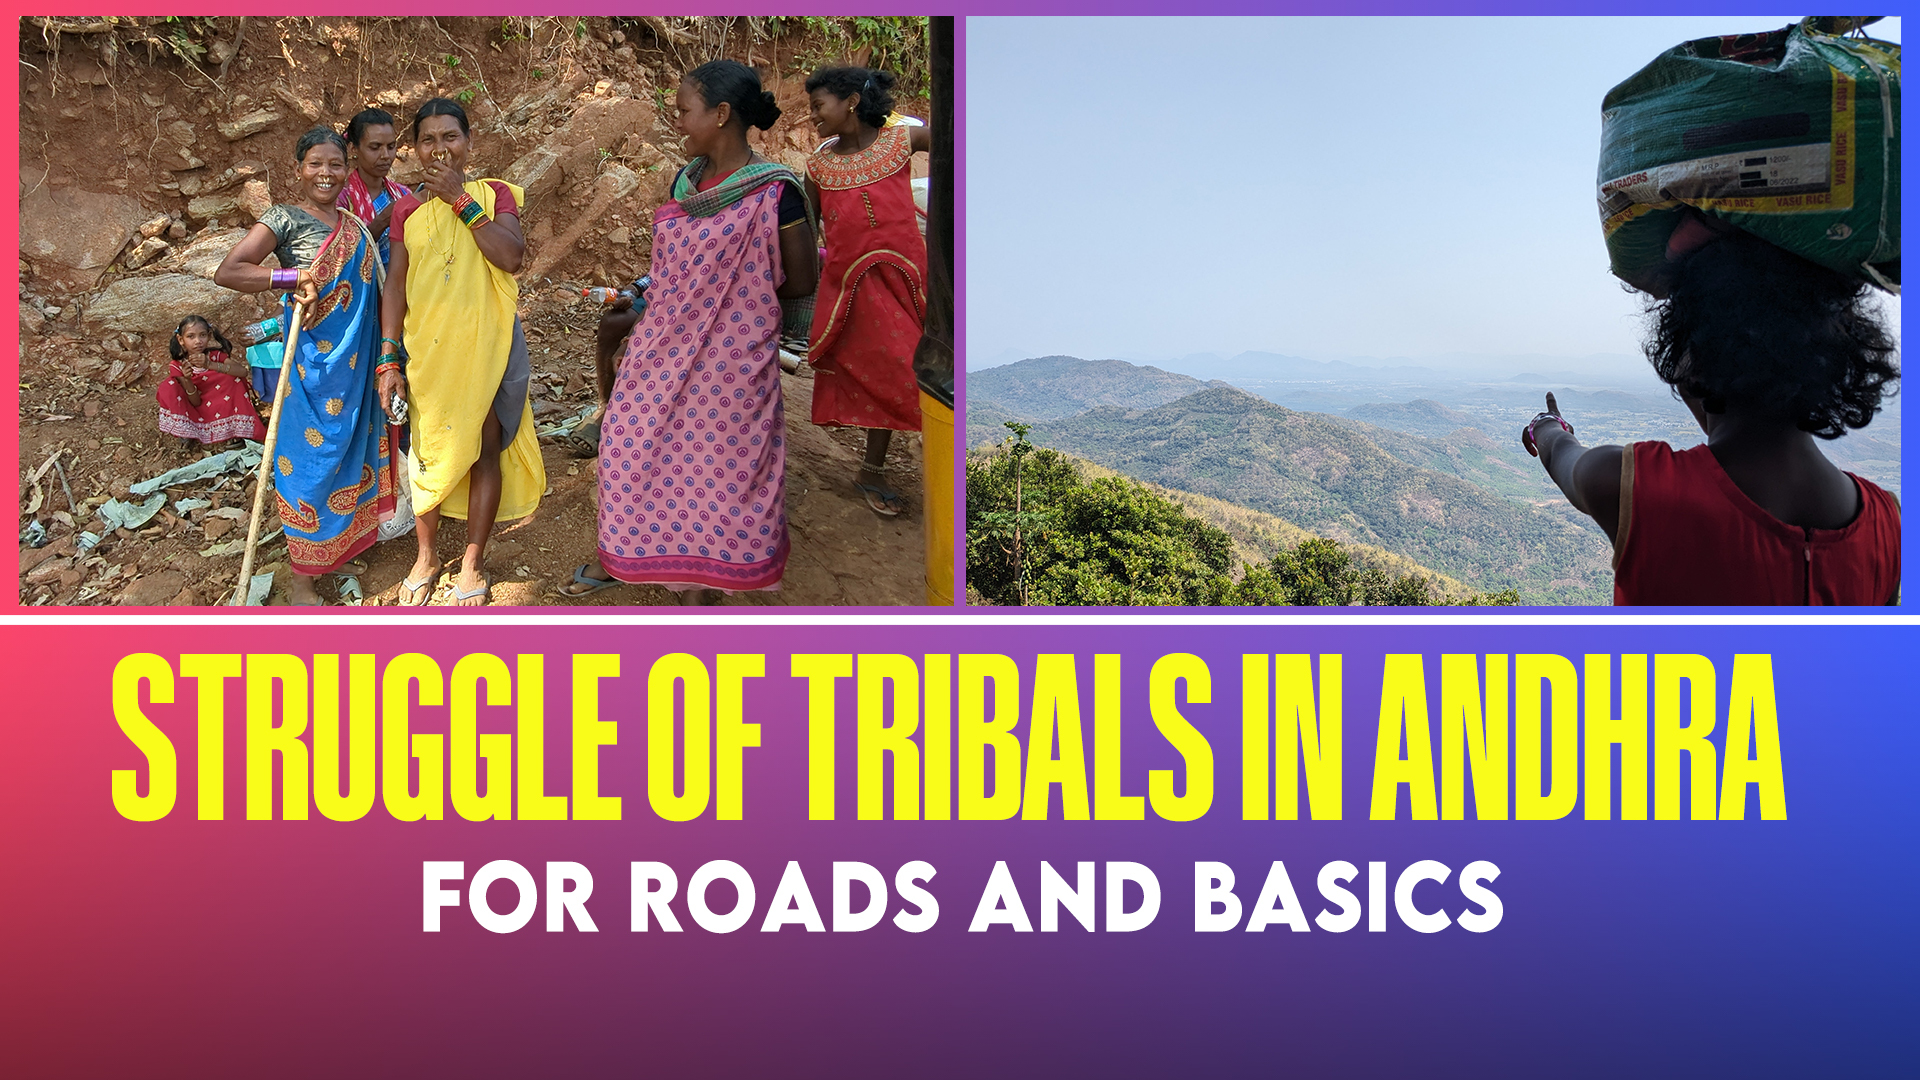 For the 300 tribals living in seven villages of the Eastern Ghats hills range, a "road" is a dream and a lifeline.